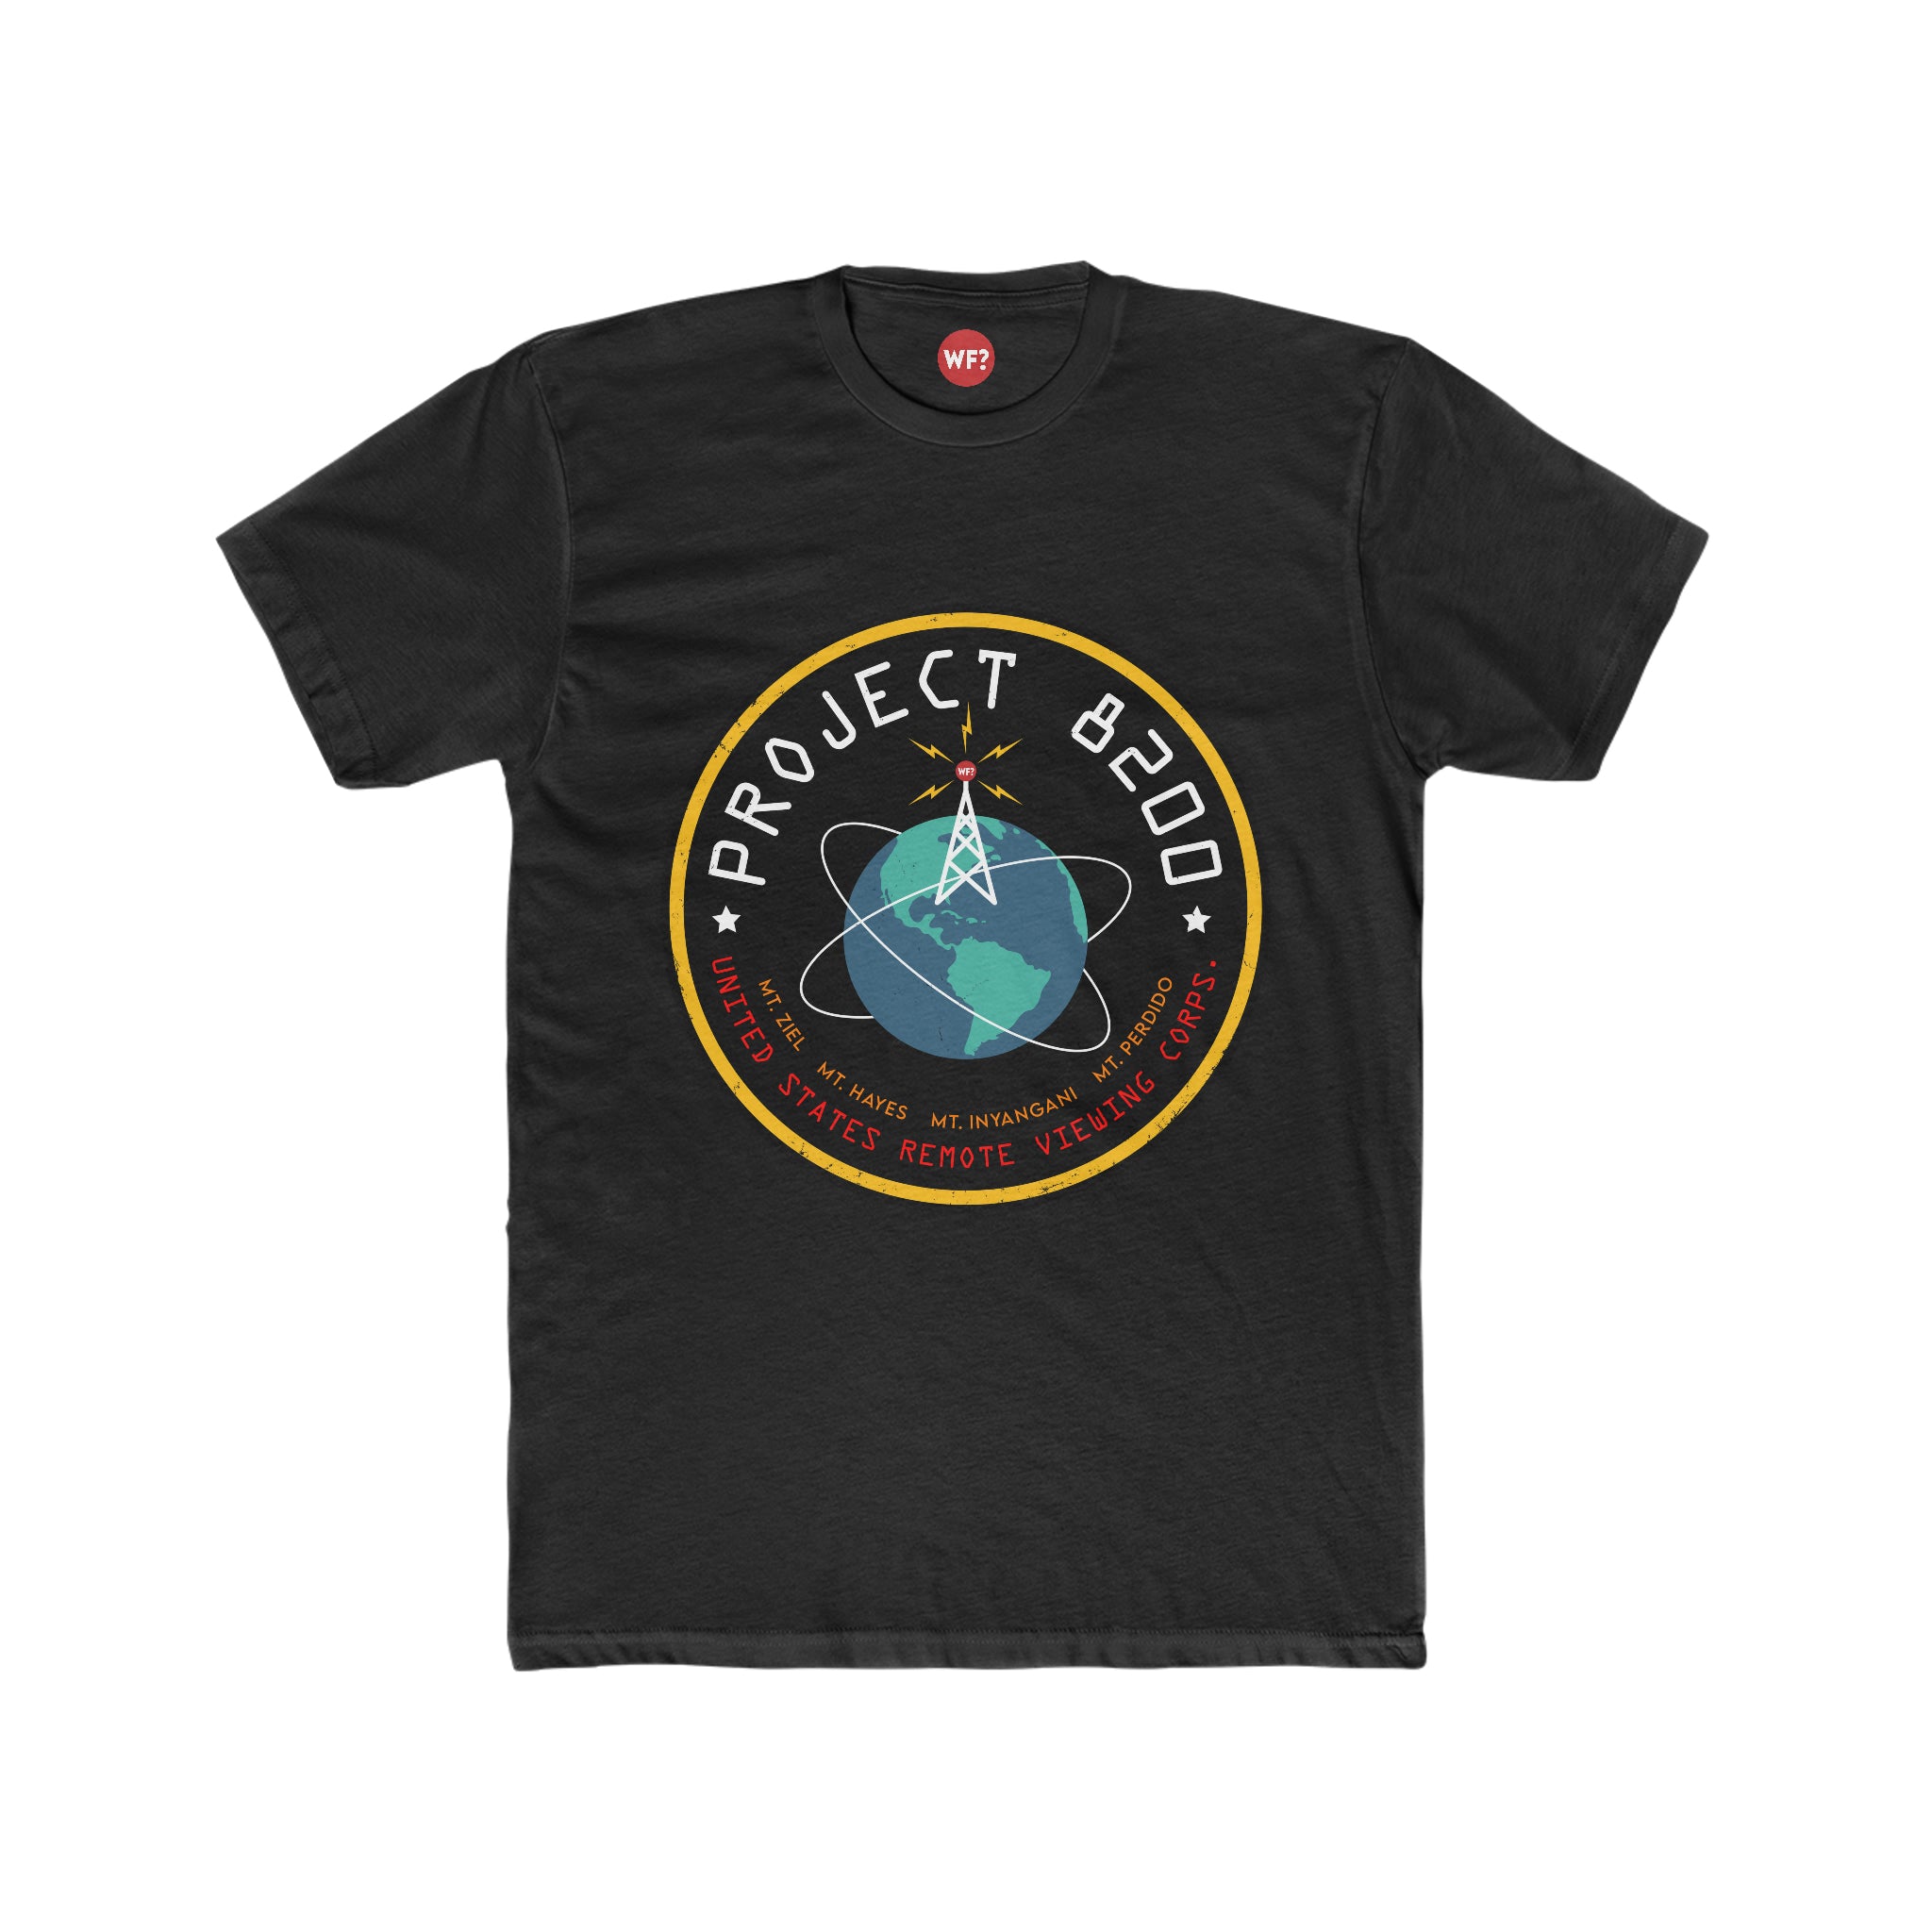 Buy solid-black Project 8200 Limited T-Shirt